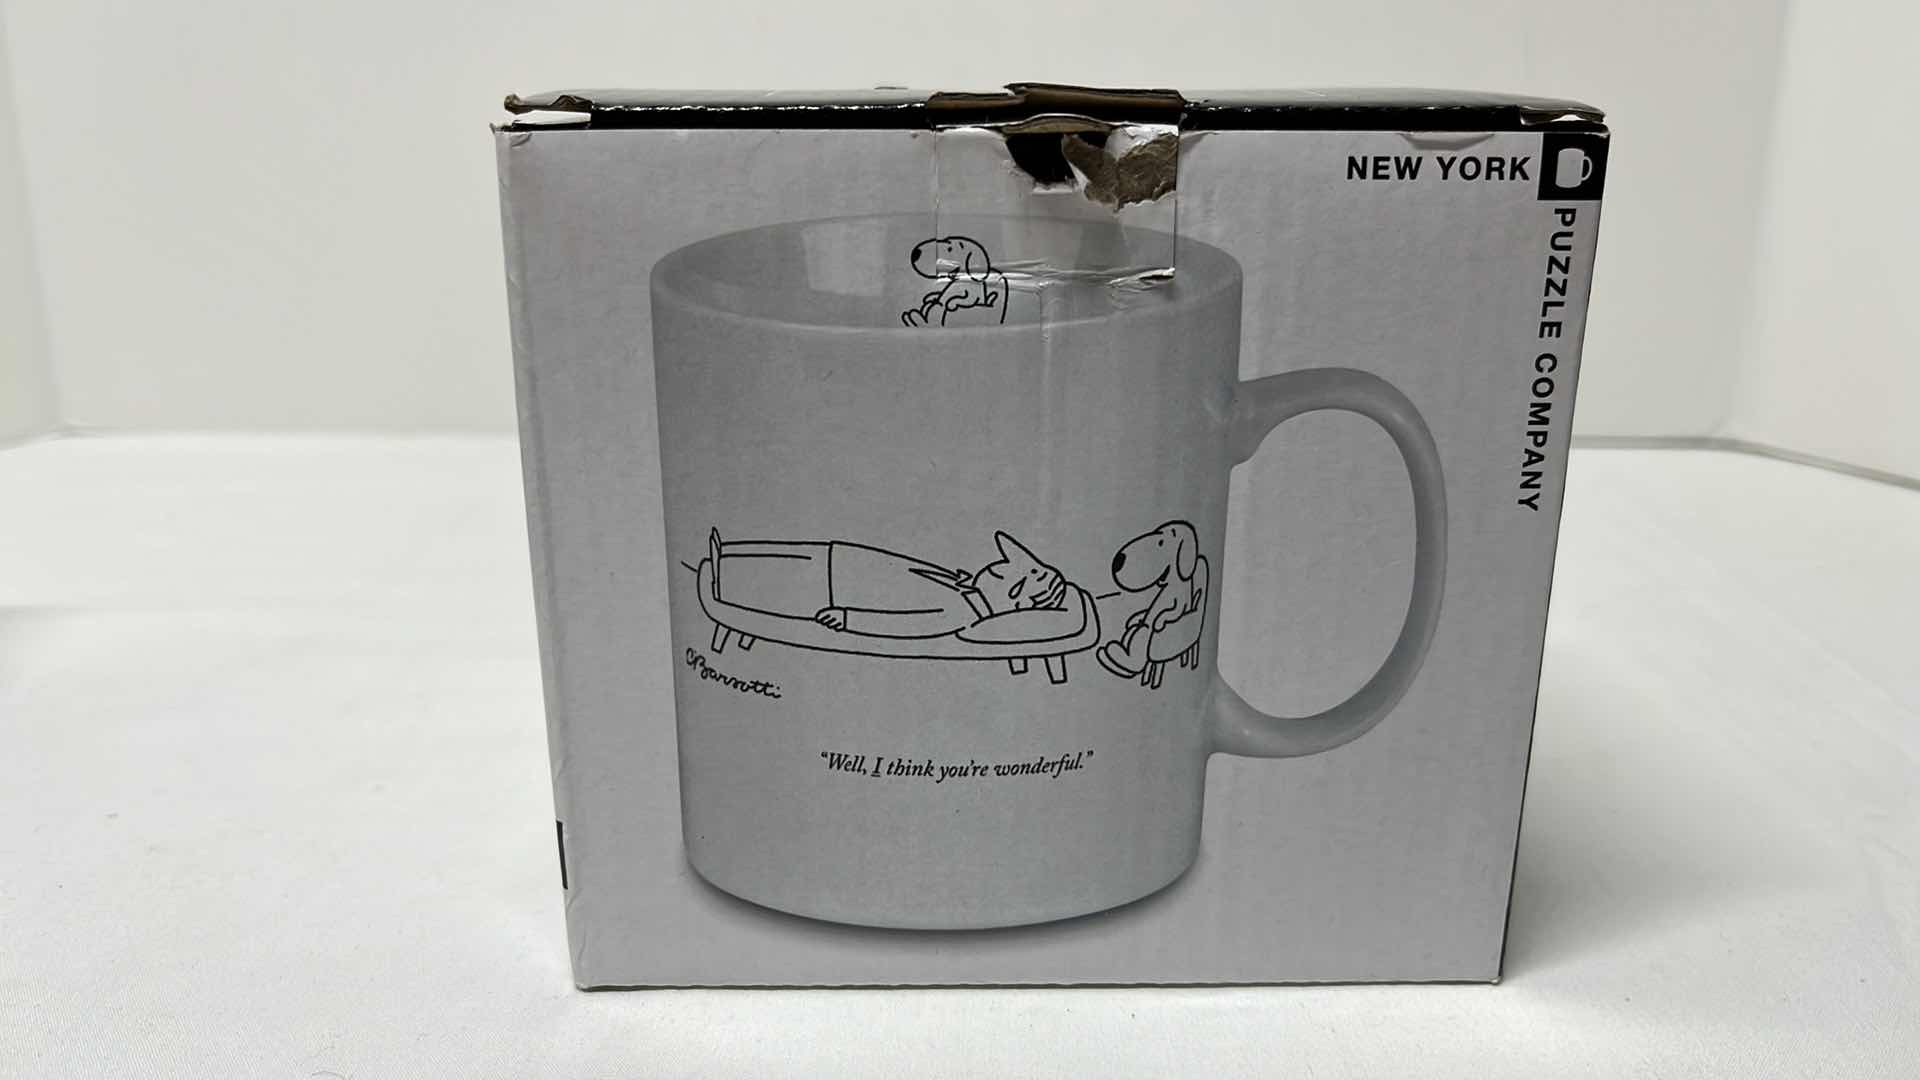 Photo 4 of KEEP CUP 8 OZ REUSABLE BREW GLASS COFFEE CUP, THE NEW YORKER 15 OZ MUG & 10 CUP COFFEE POT